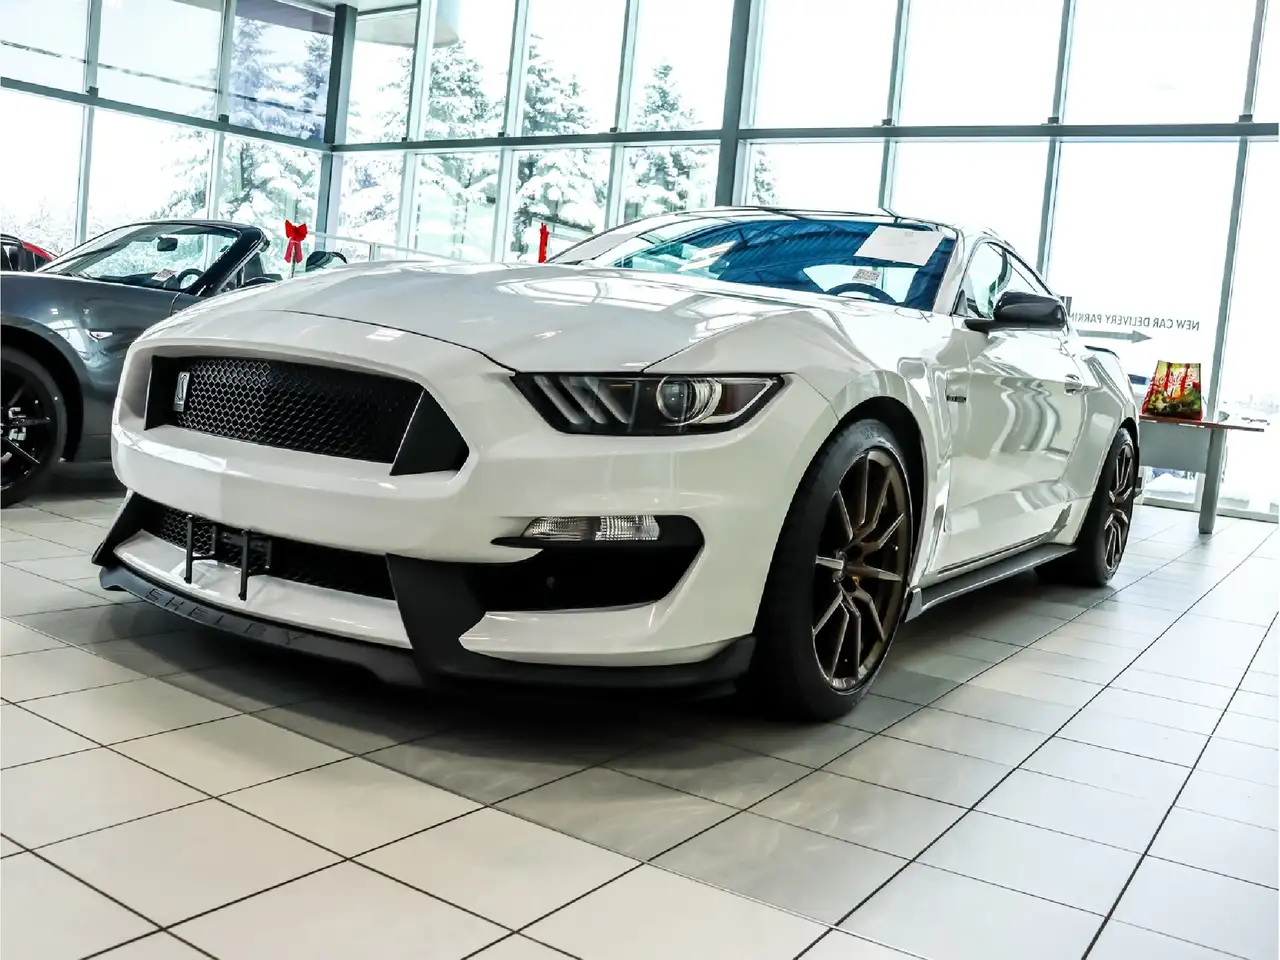 2016 - Ford Mustang Mustang Boîte manuelle Coupé